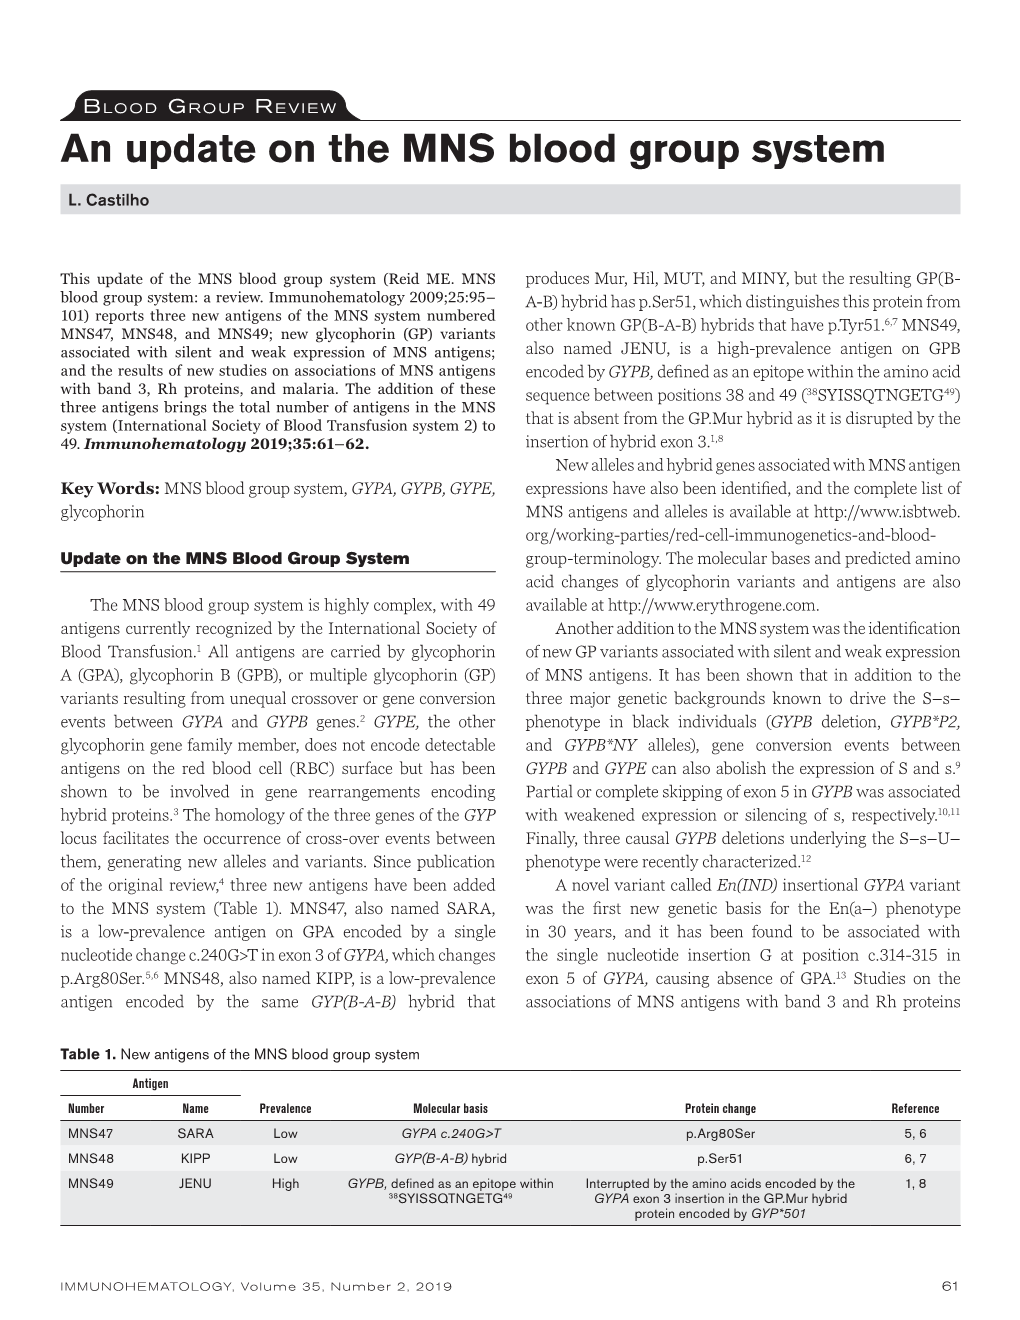 An Update on the MNS Blood Group System